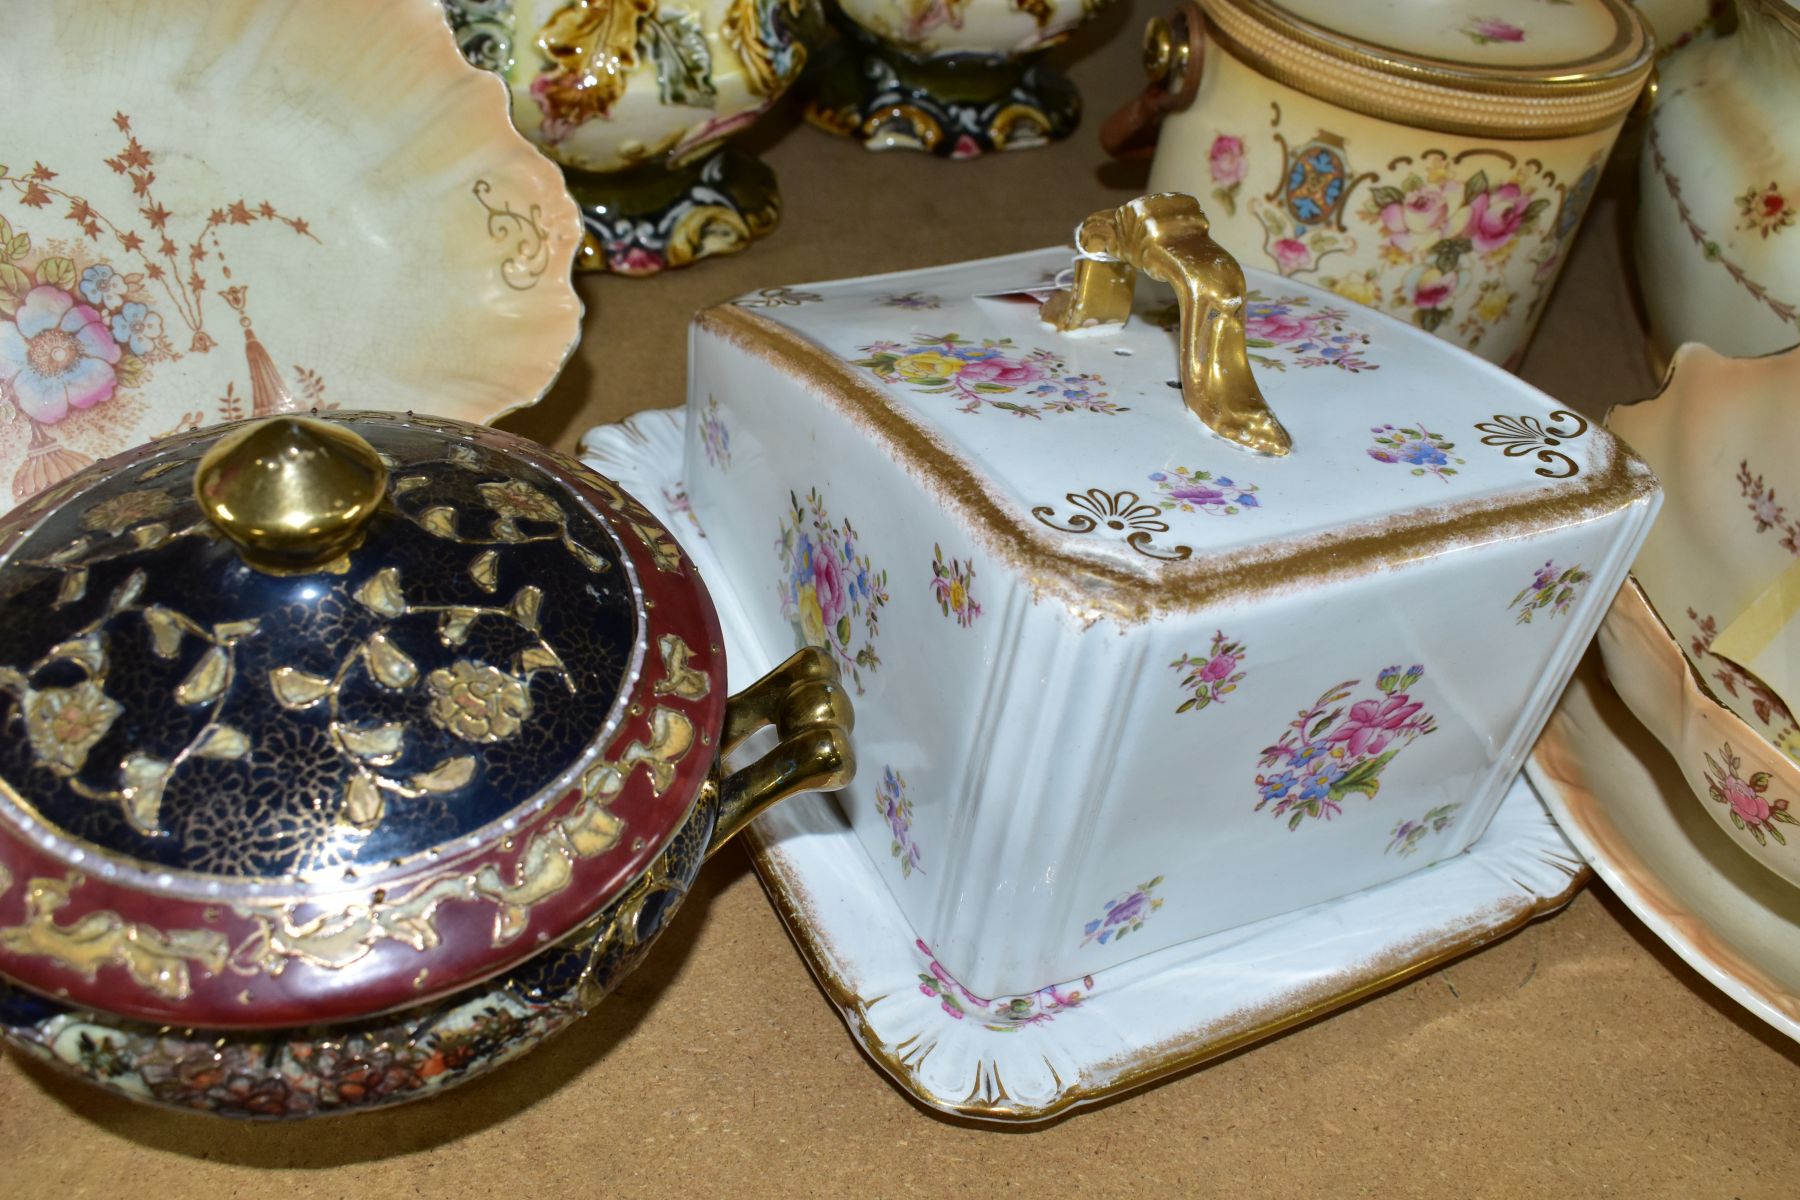 LATE 19TH / EARLY 20TH CENTURY CERAMICS ETC, comprising a pair of blue and gilt rimmed plates, - Image 9 of 12